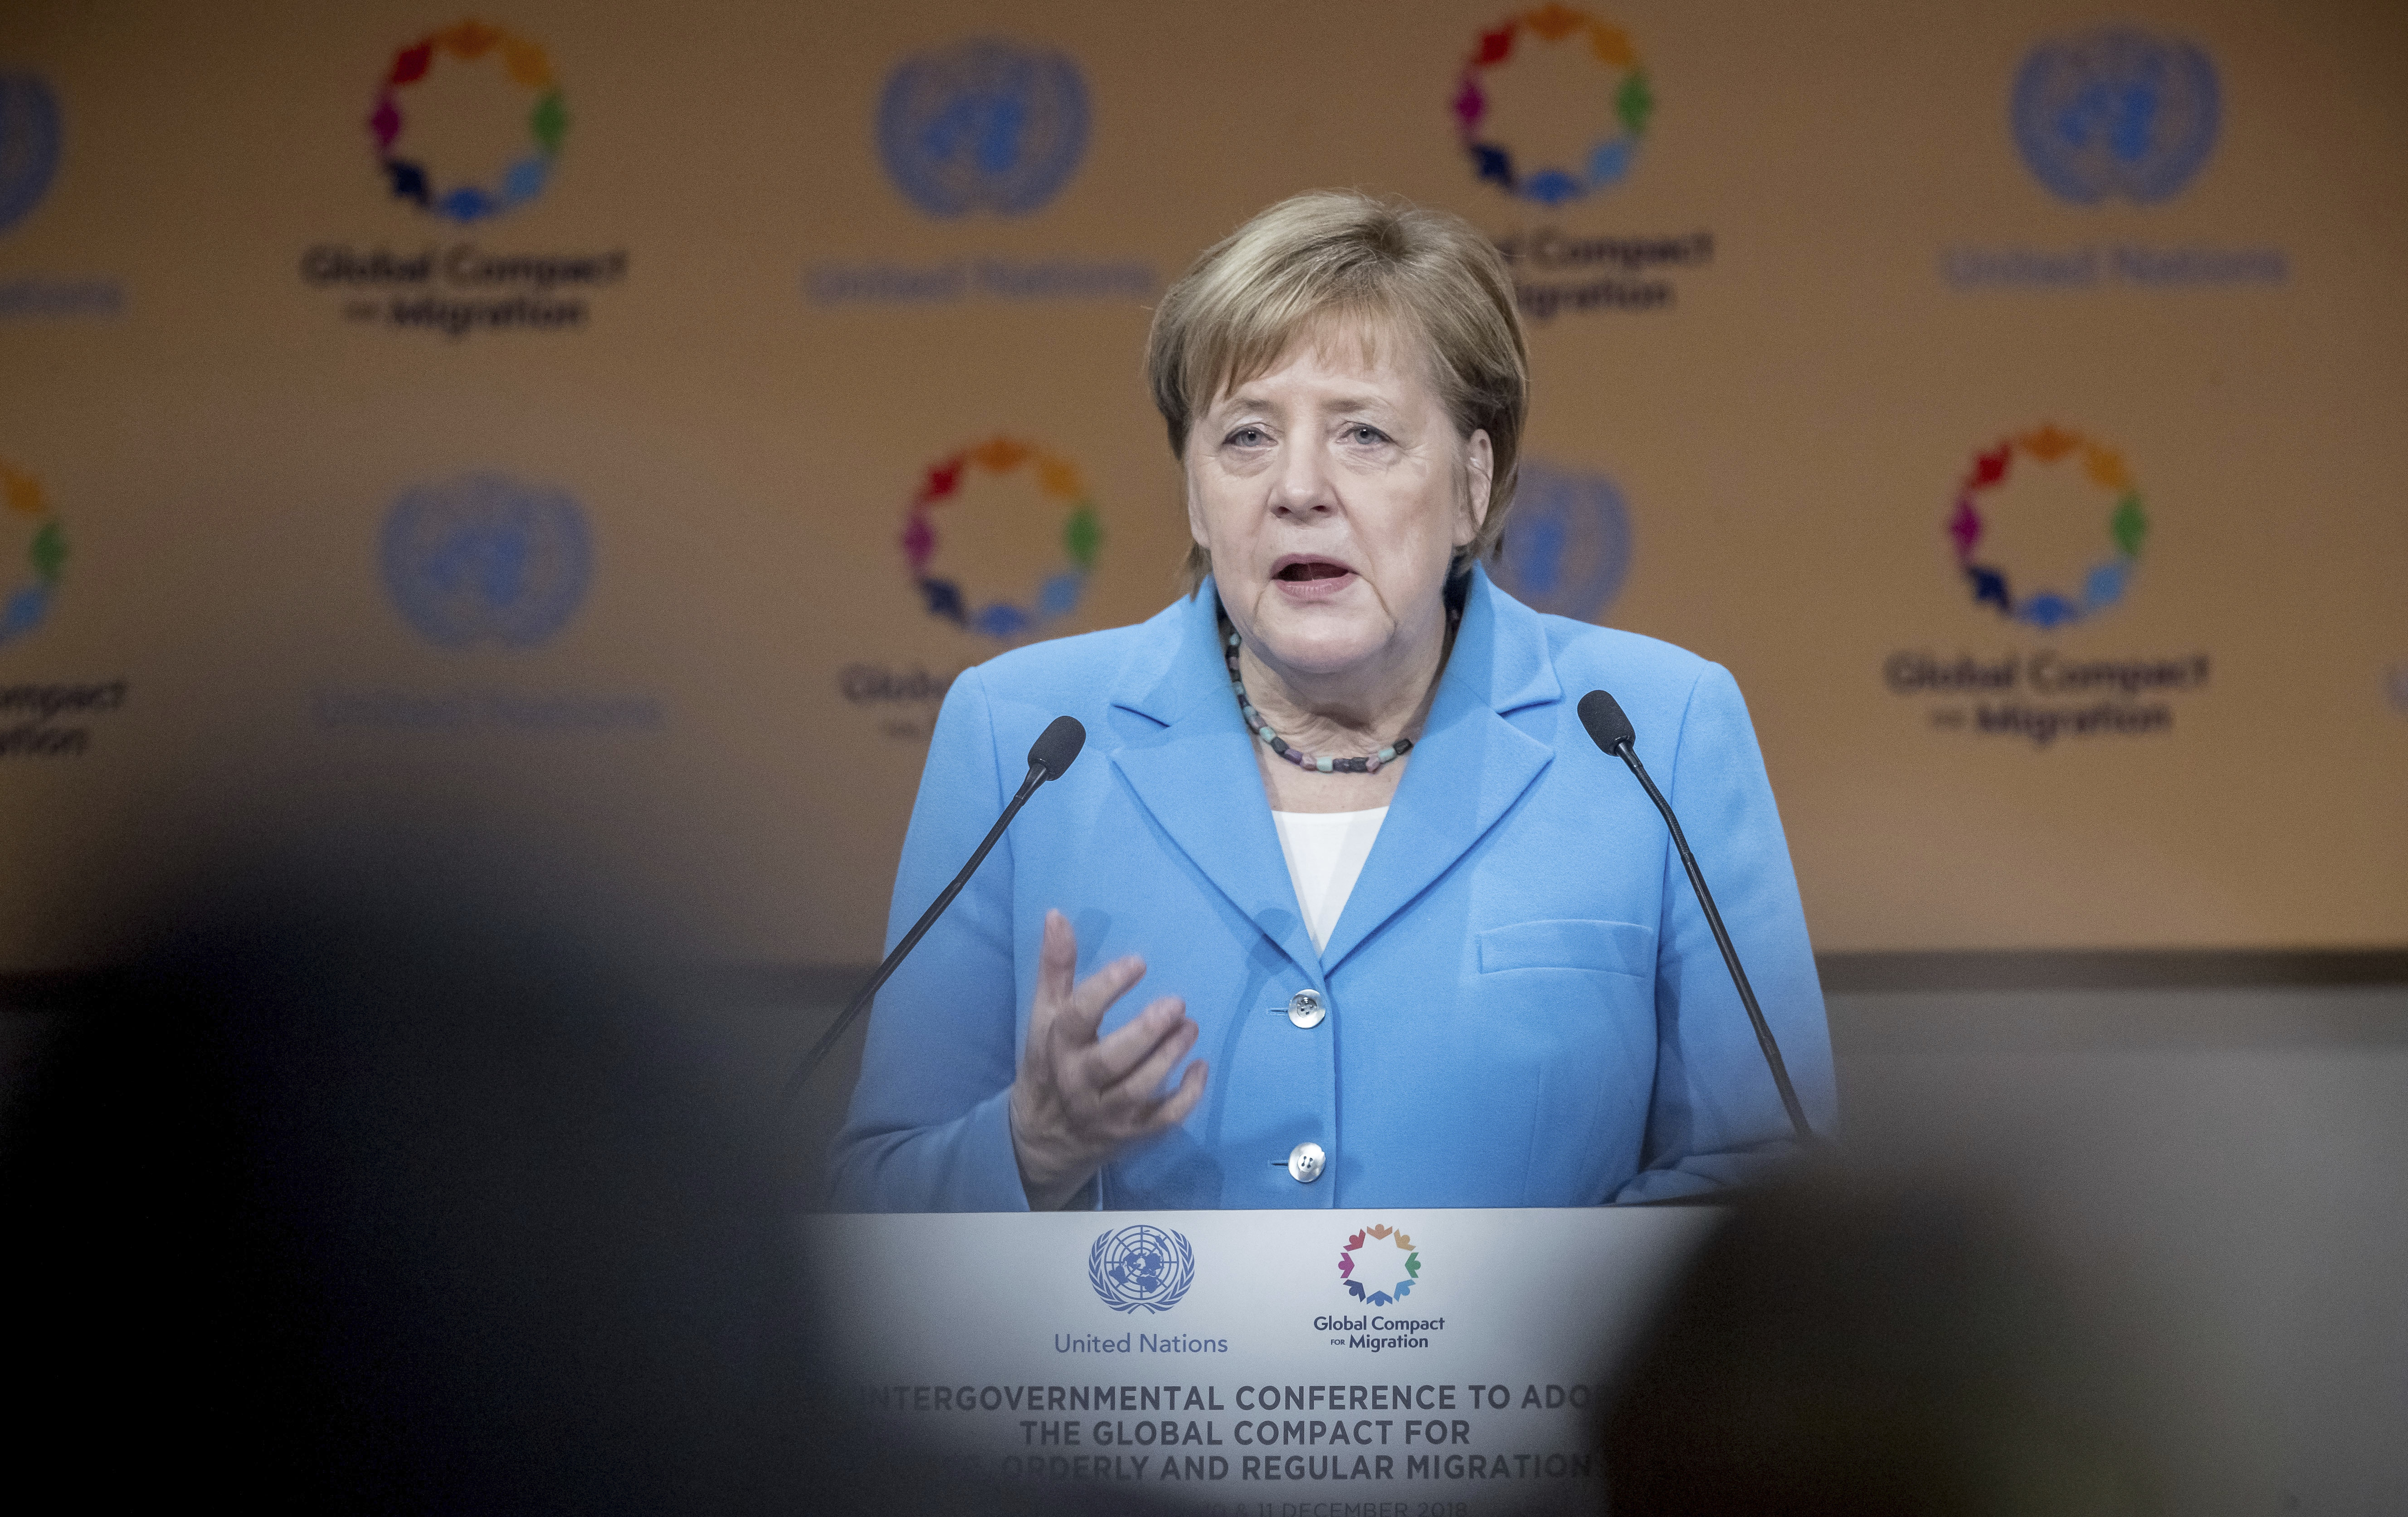 10 December 2018, Morocco, Marrakesch: Chancellor Angela Merkel (CDU) speaks at the UN Conference on the Migration Pact. Chancellor Angela Merkel (CDU) has praised the UN Migration Pact as a milestone in international migration policy. Photo by: Michael Kappeler/picture-alliance/dpa/AP Images